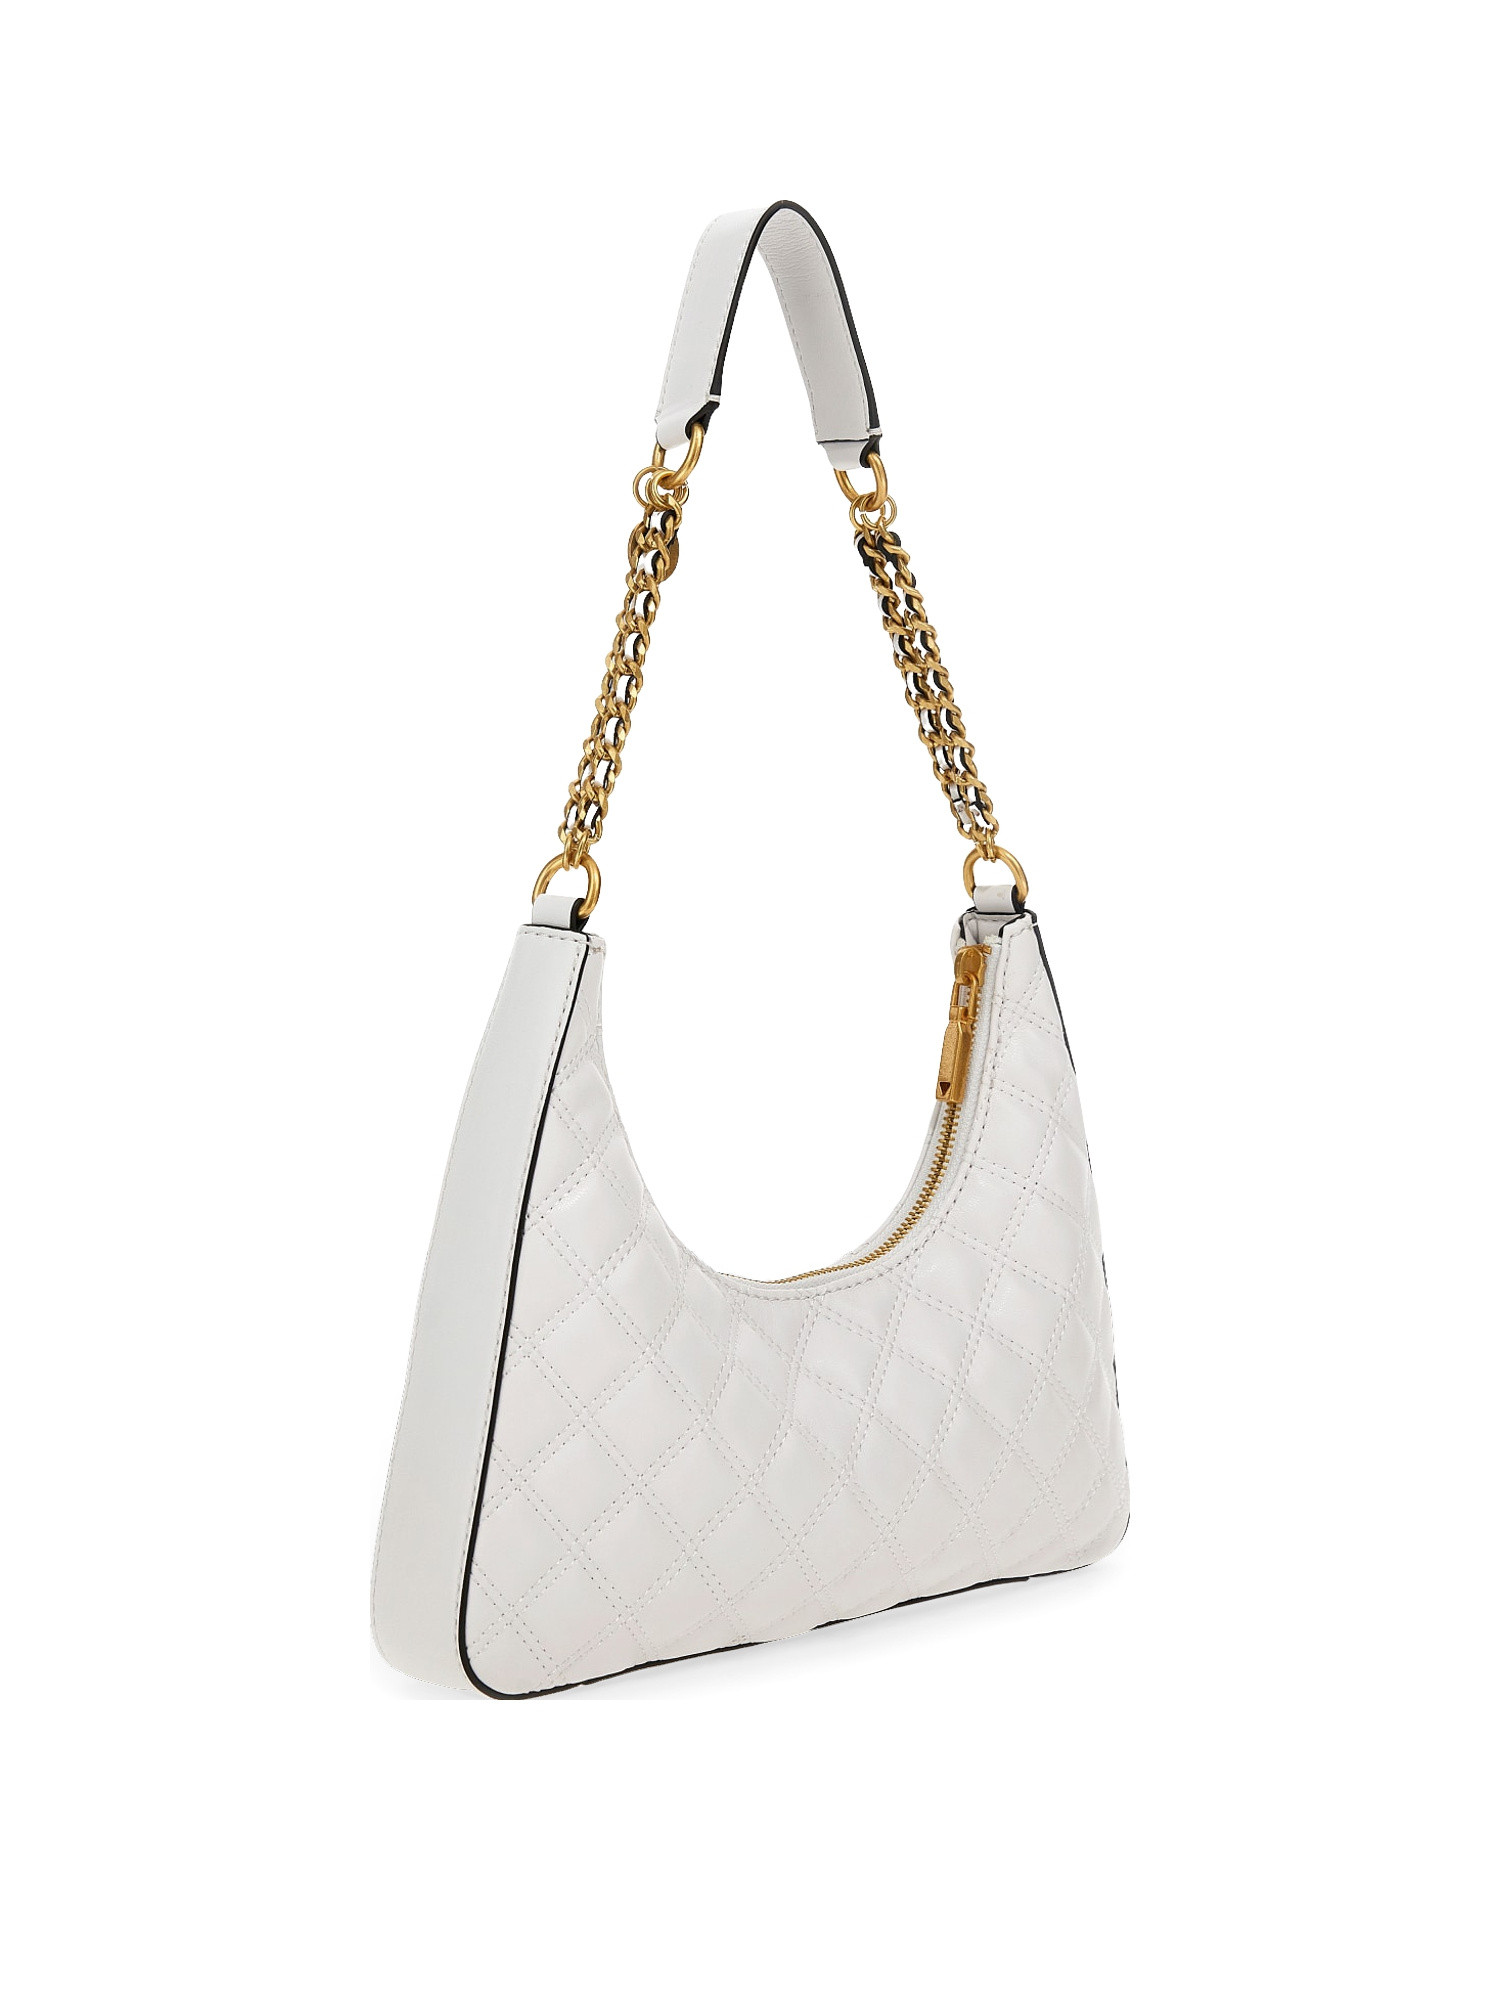 Guess - Borsa a spalla Giully, Bianco, large image number 1